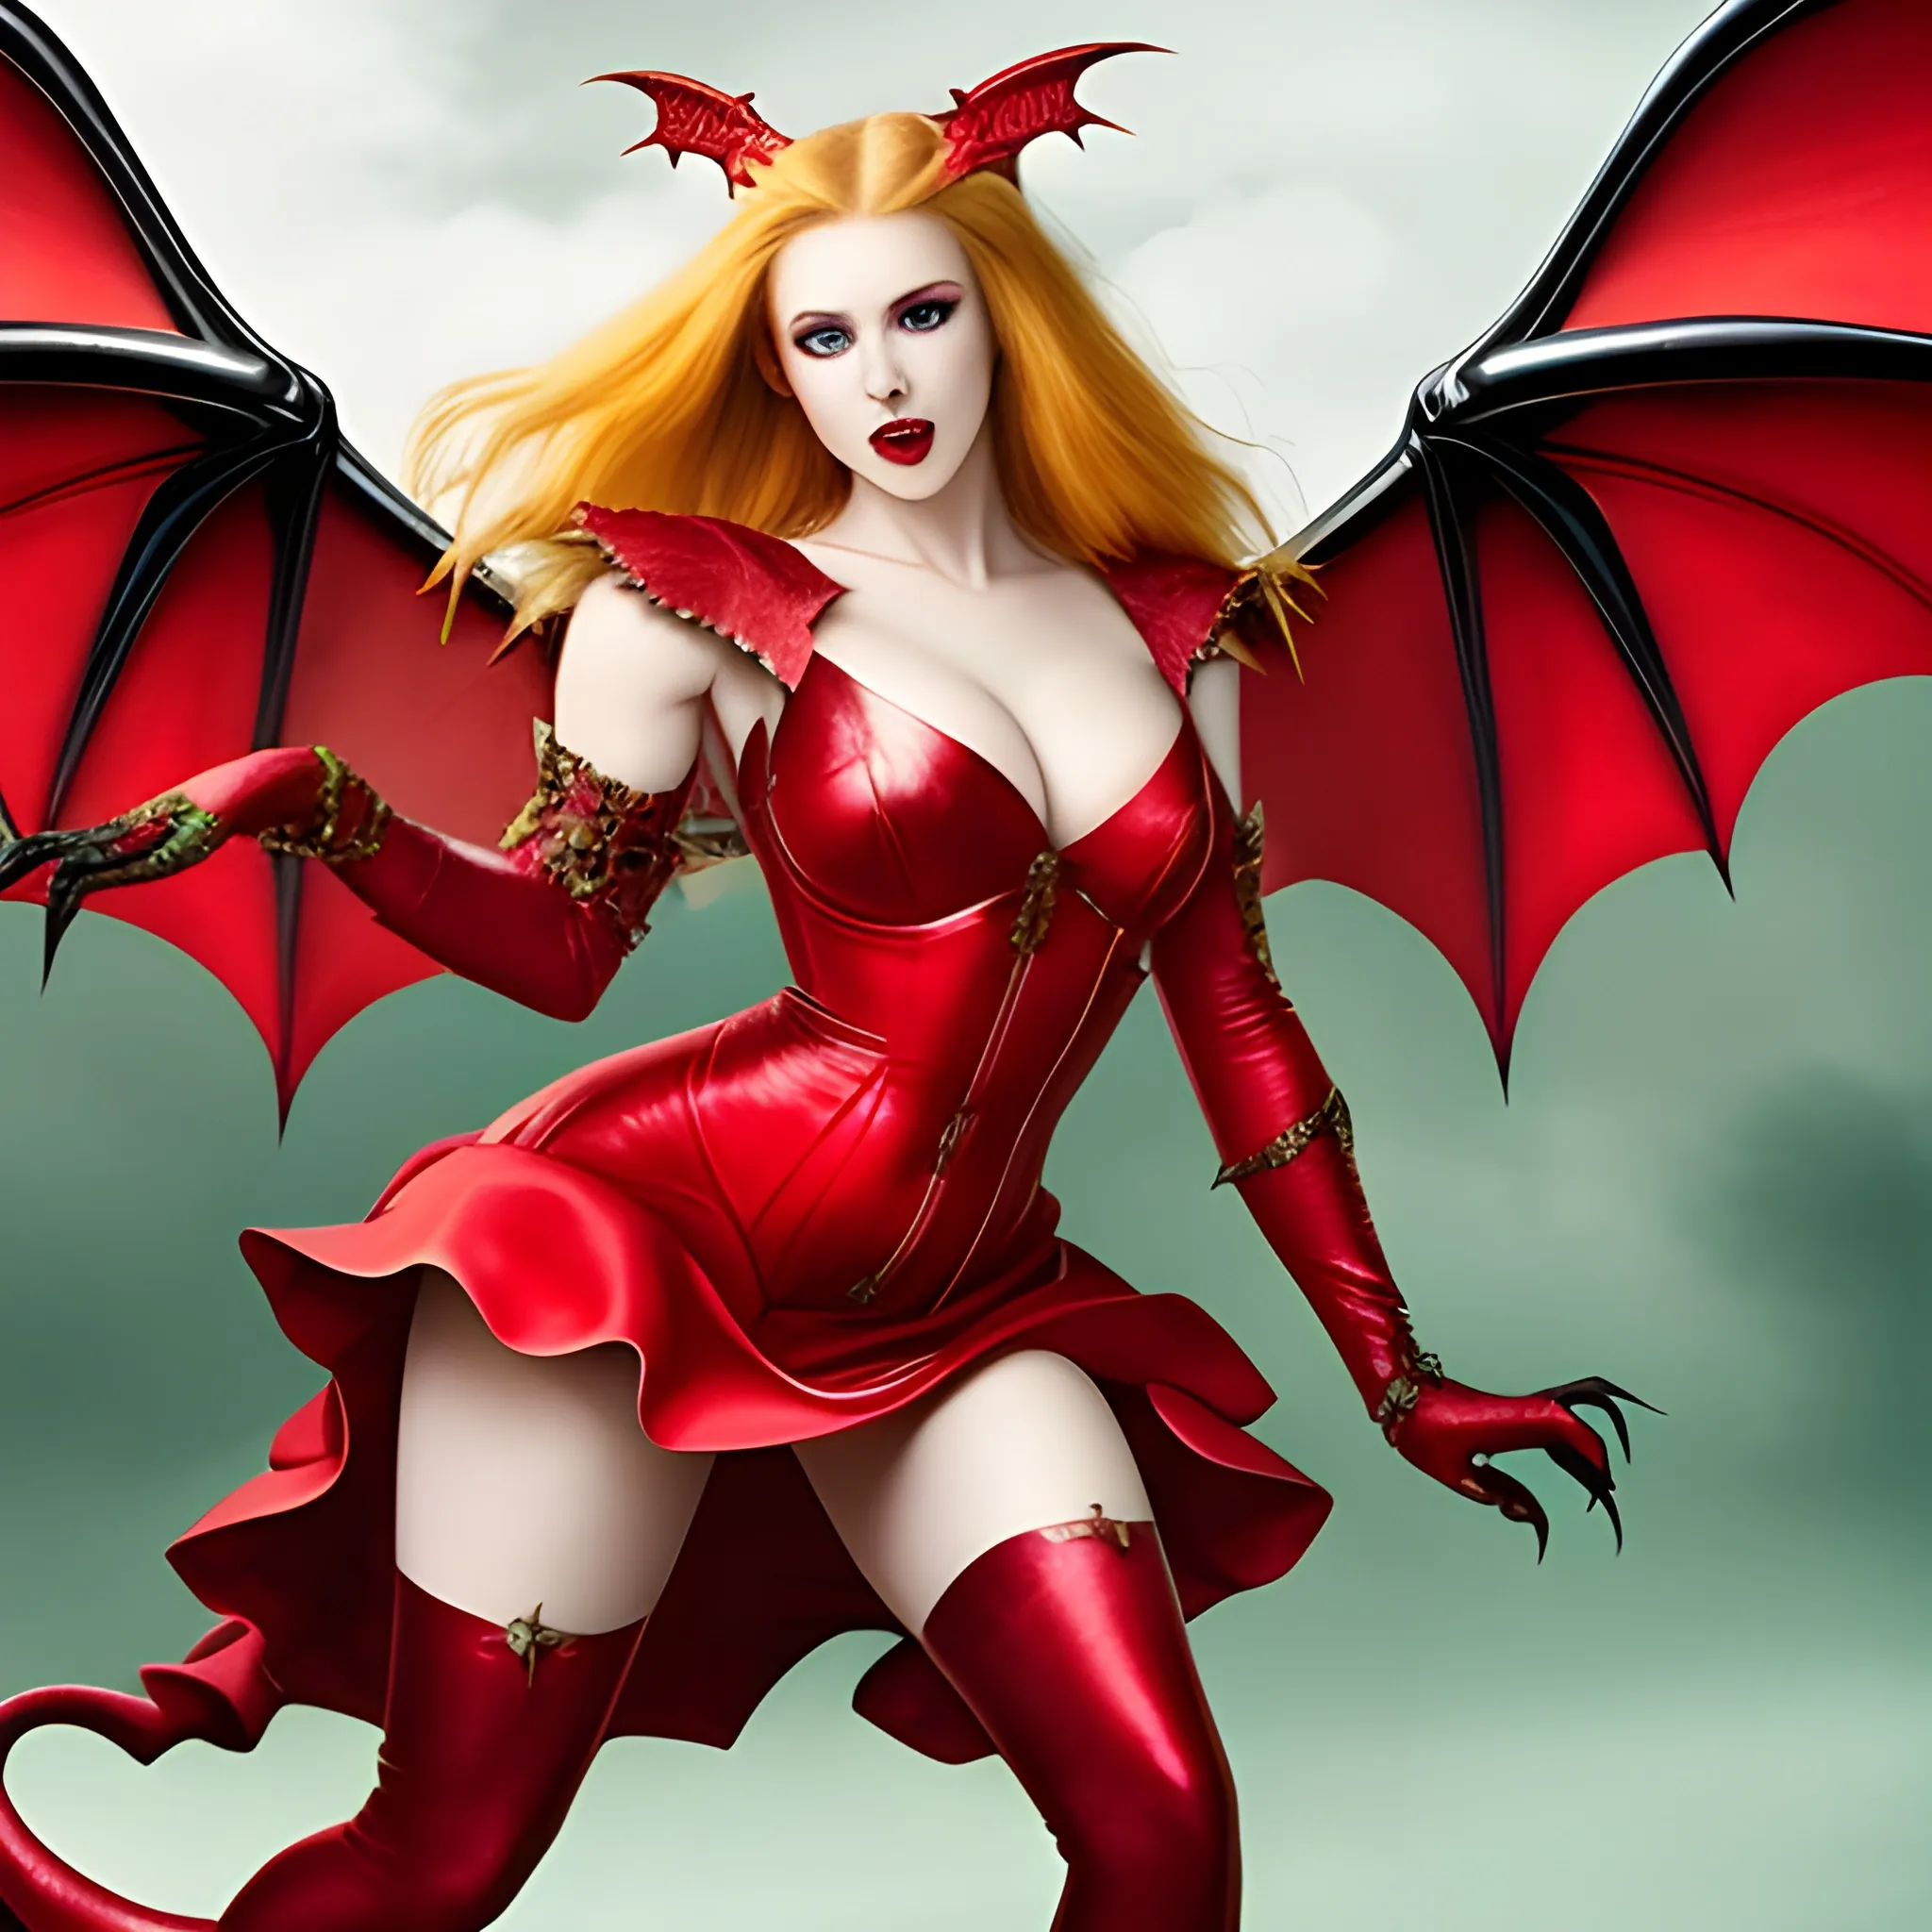 Photo of beautiful dragon-woman. Red dress. Green eyes, golden hair, green wings, black stockings, red high heeled shoes, sharp teeth, clawed hands, majestic, flying